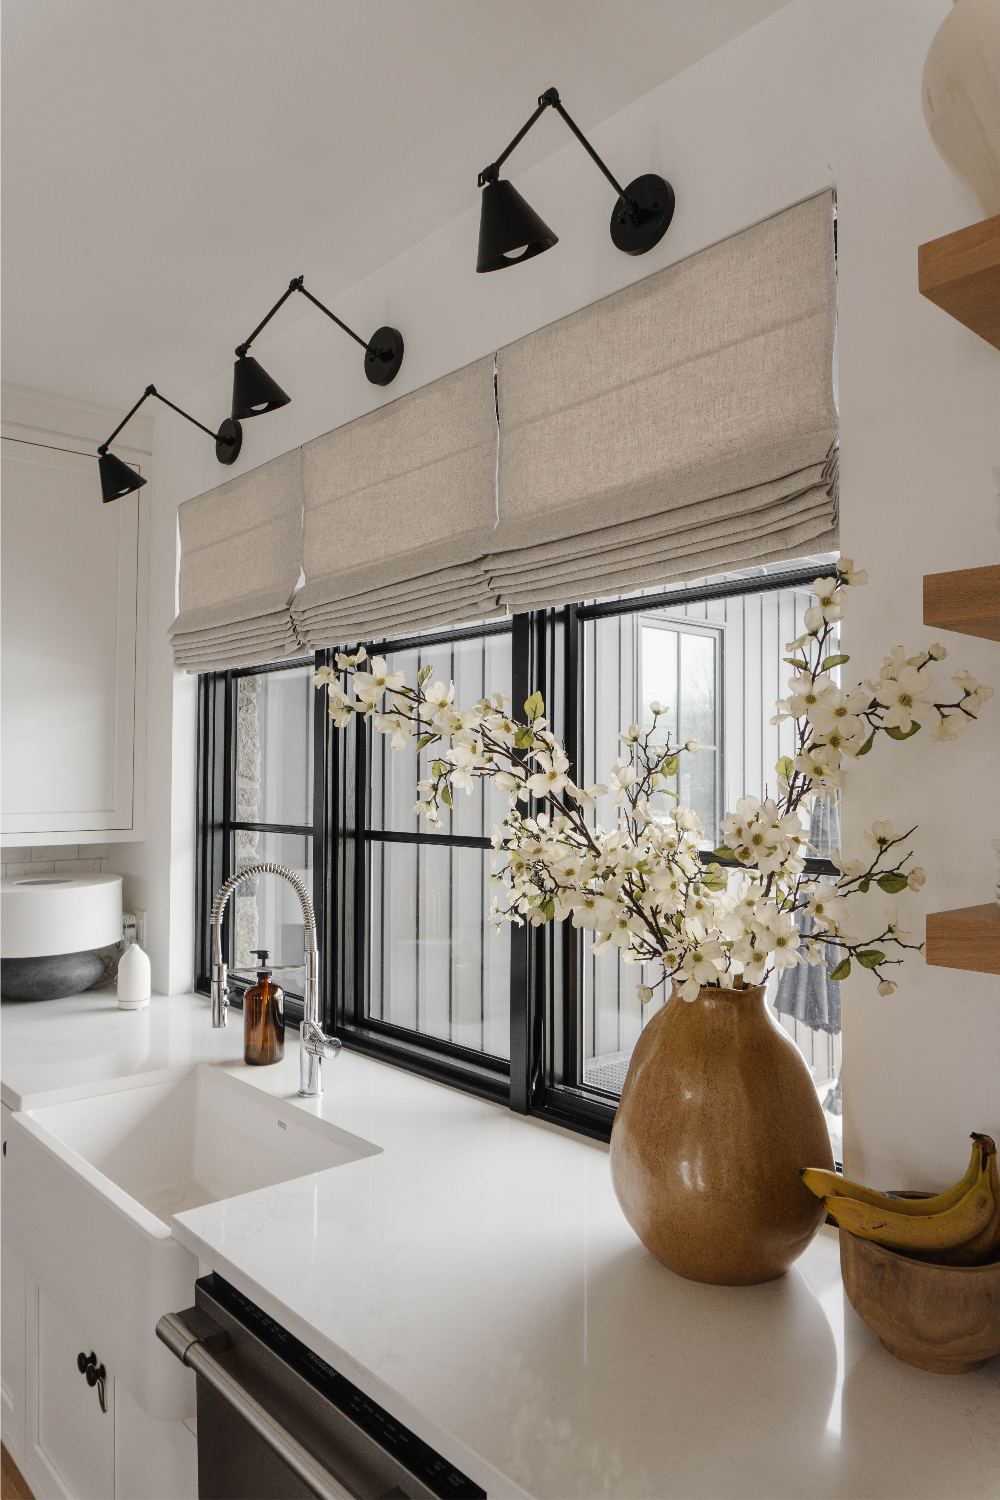 Roman Shades Add Softness to the Room  Environment